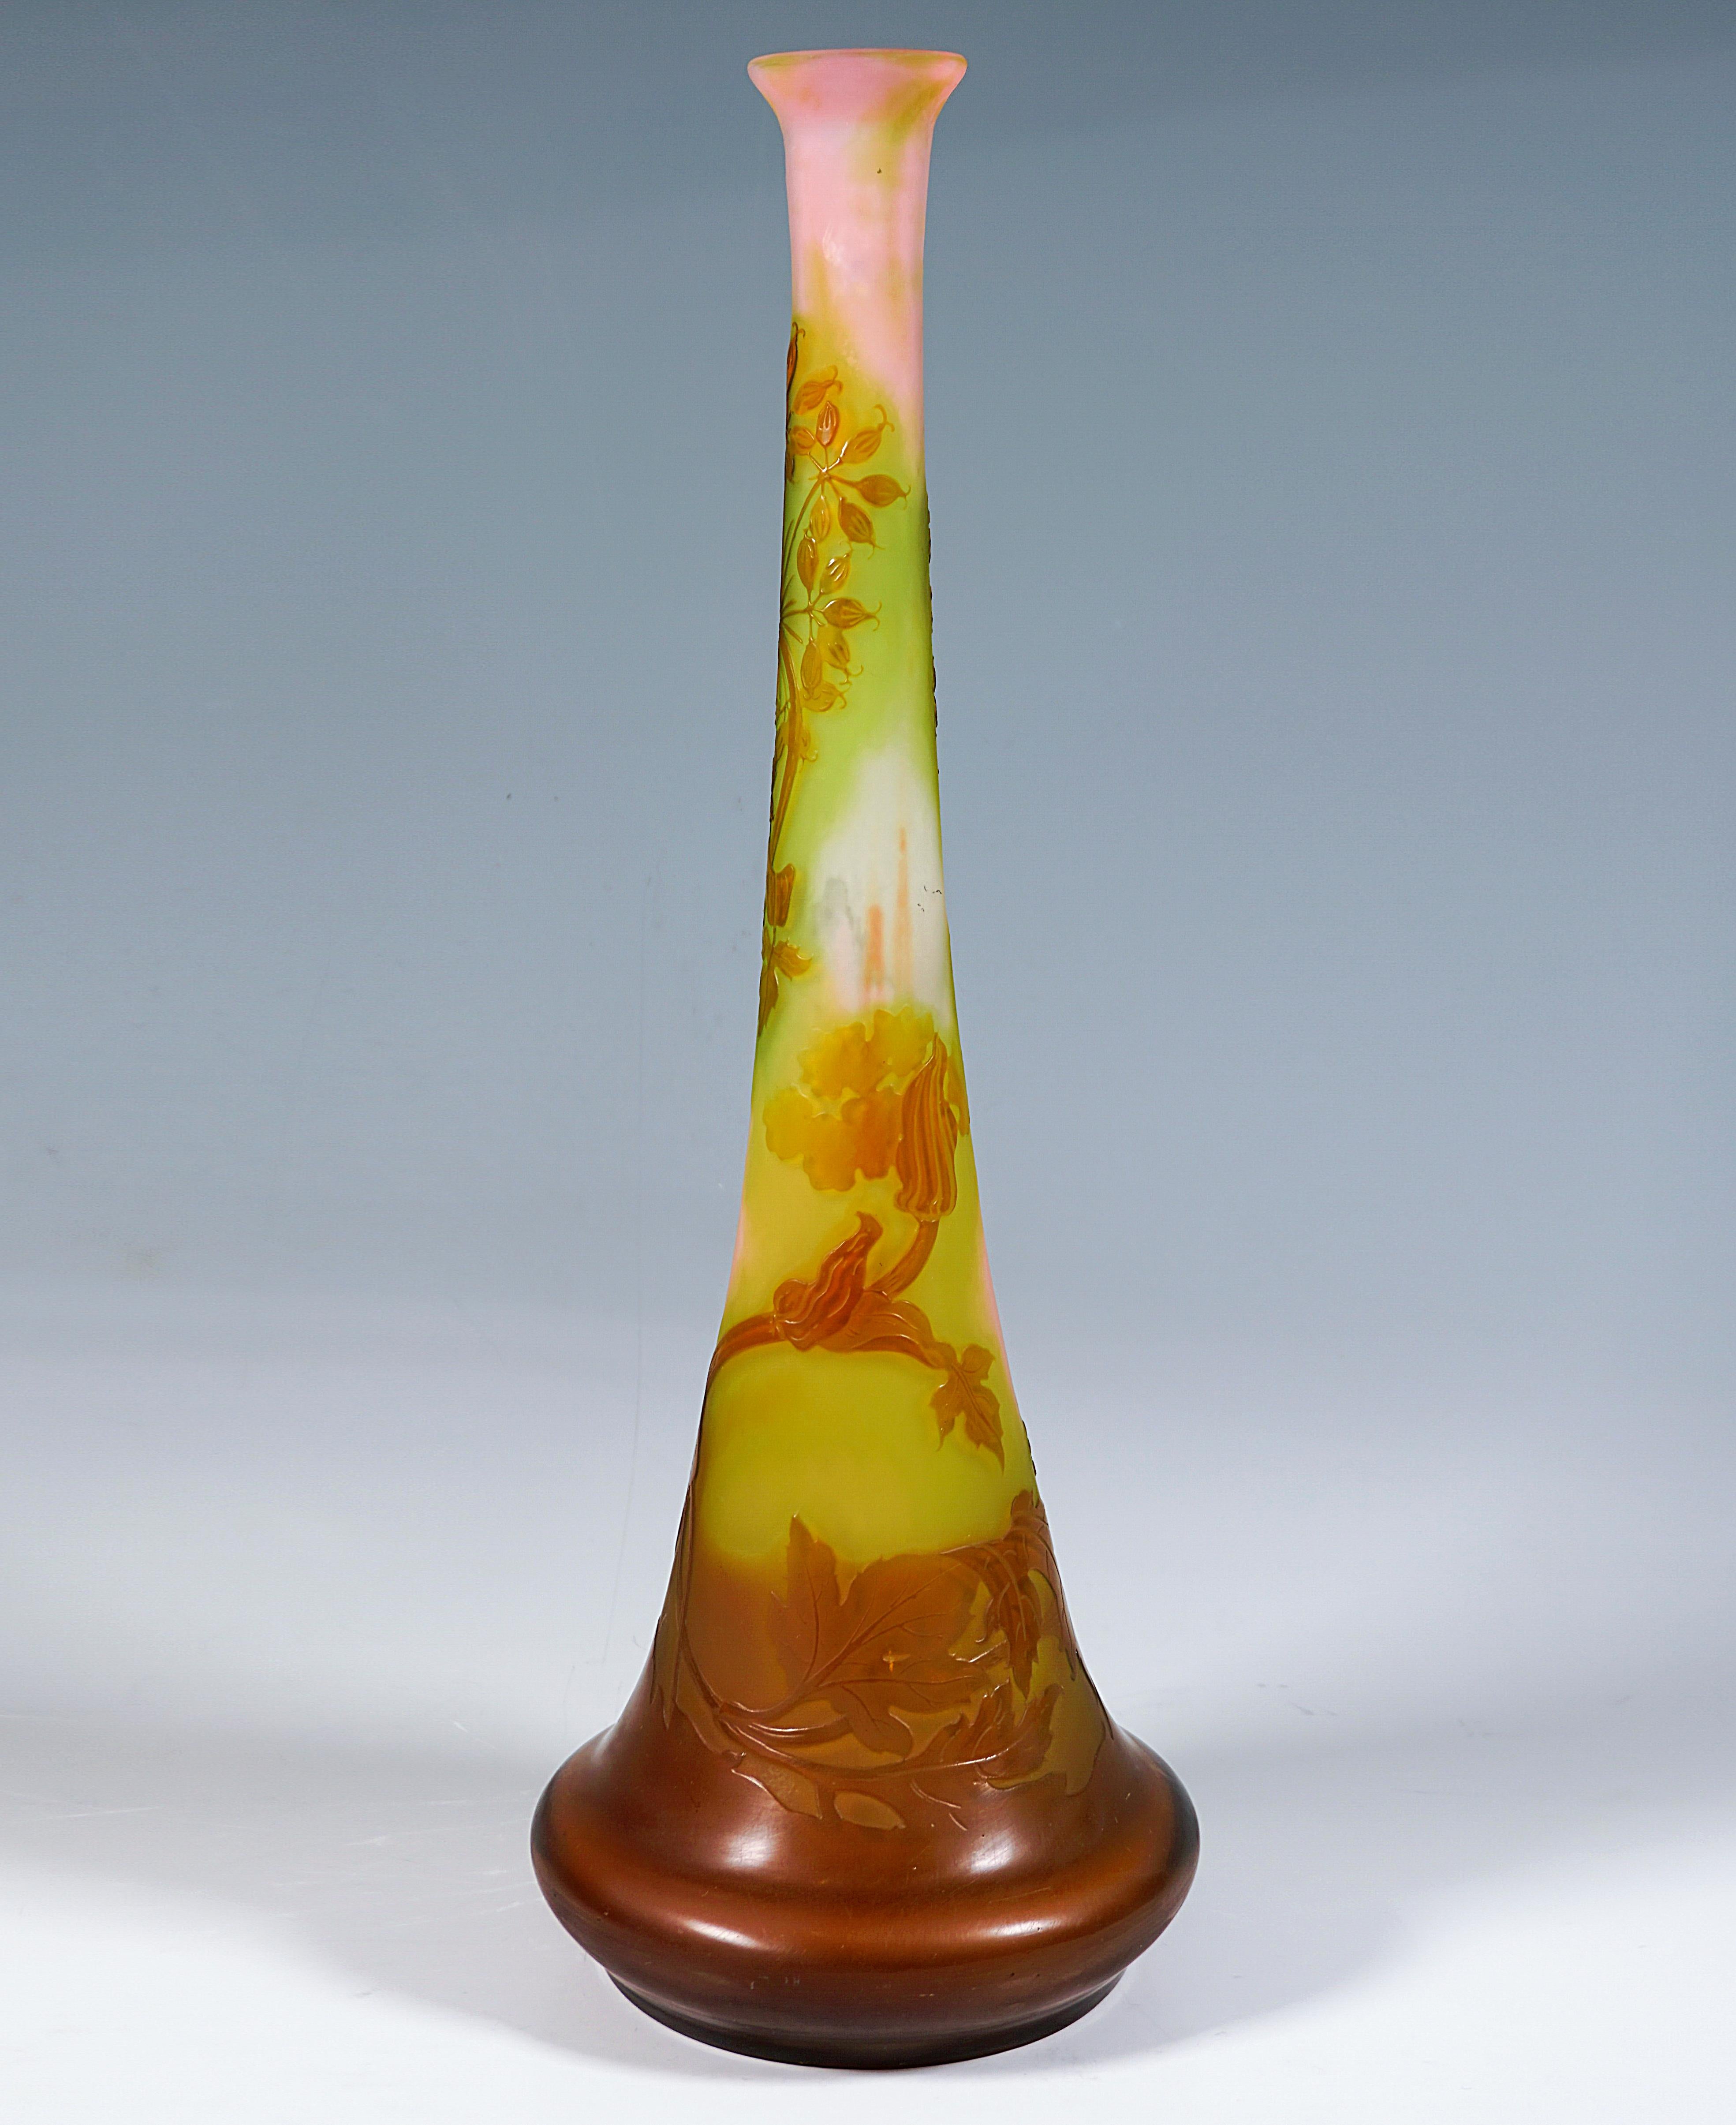 Vase with a large, round stand, widening like a bulge and then conically narrowing to a narrow opening with a flared rim, colorless glass with pink and light green colored powder inclusions, overlay in light brown, in various stages highly etched